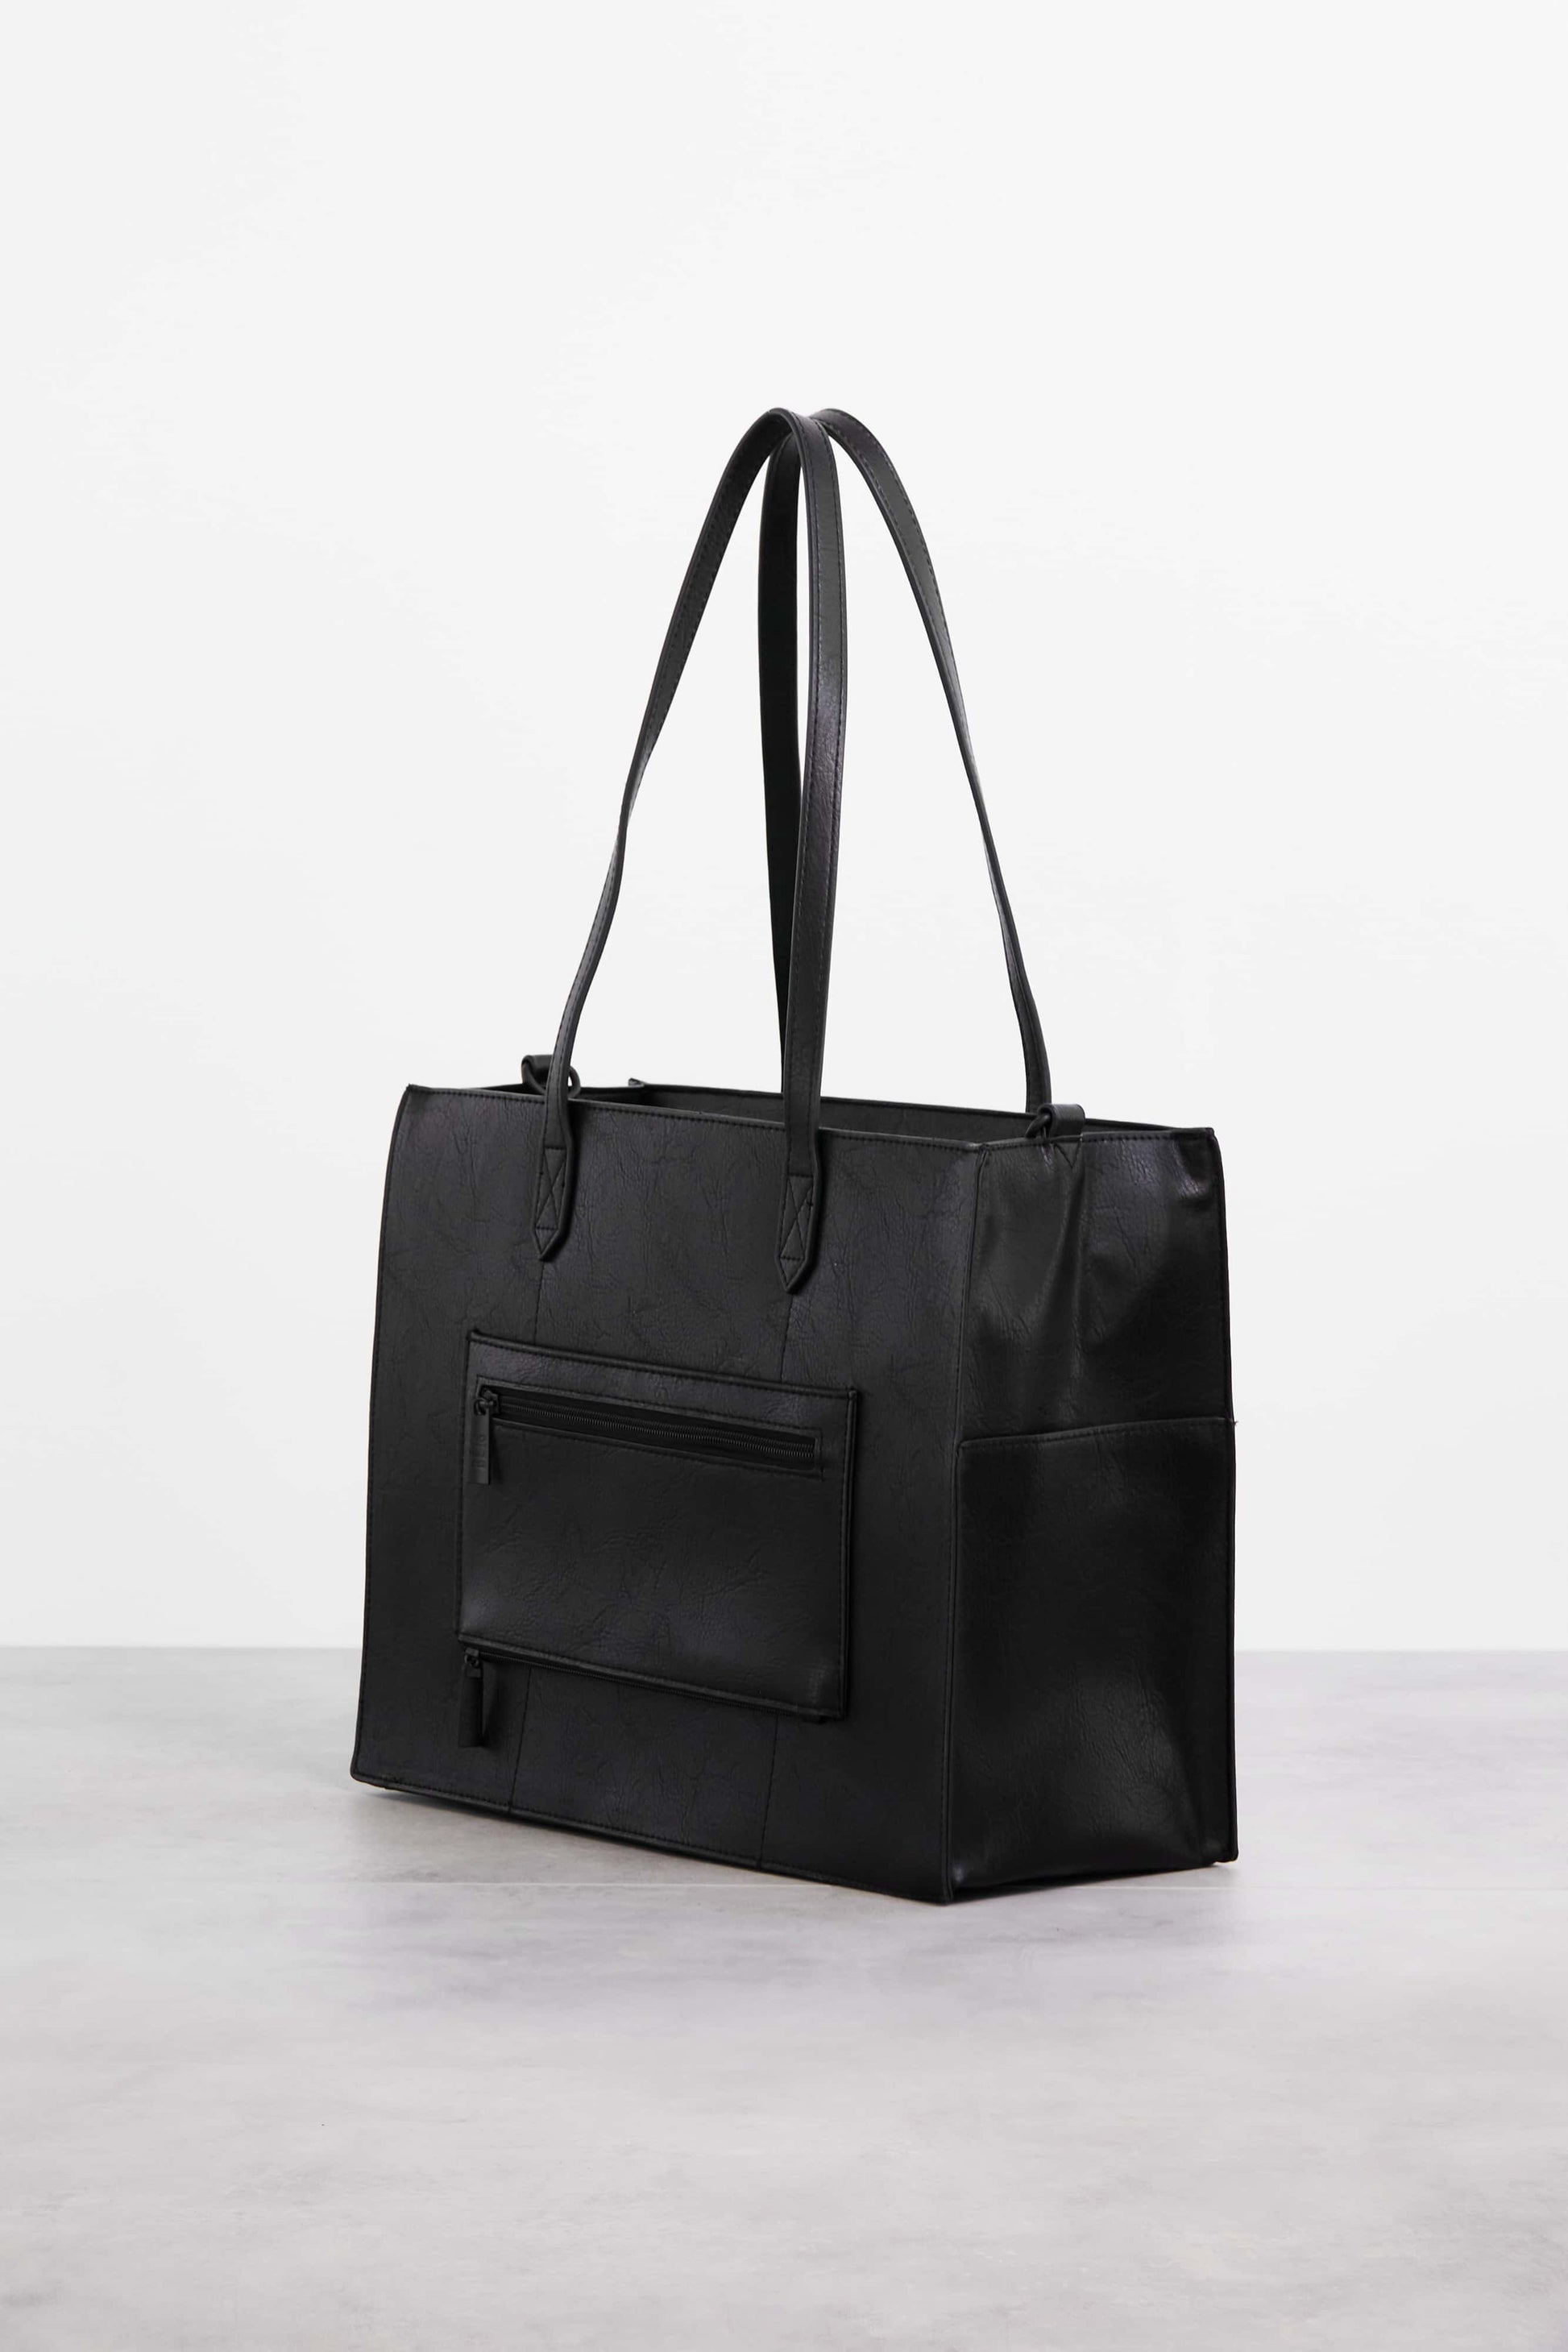 Small Square Bag Black Pocket Front for Daily,one-size